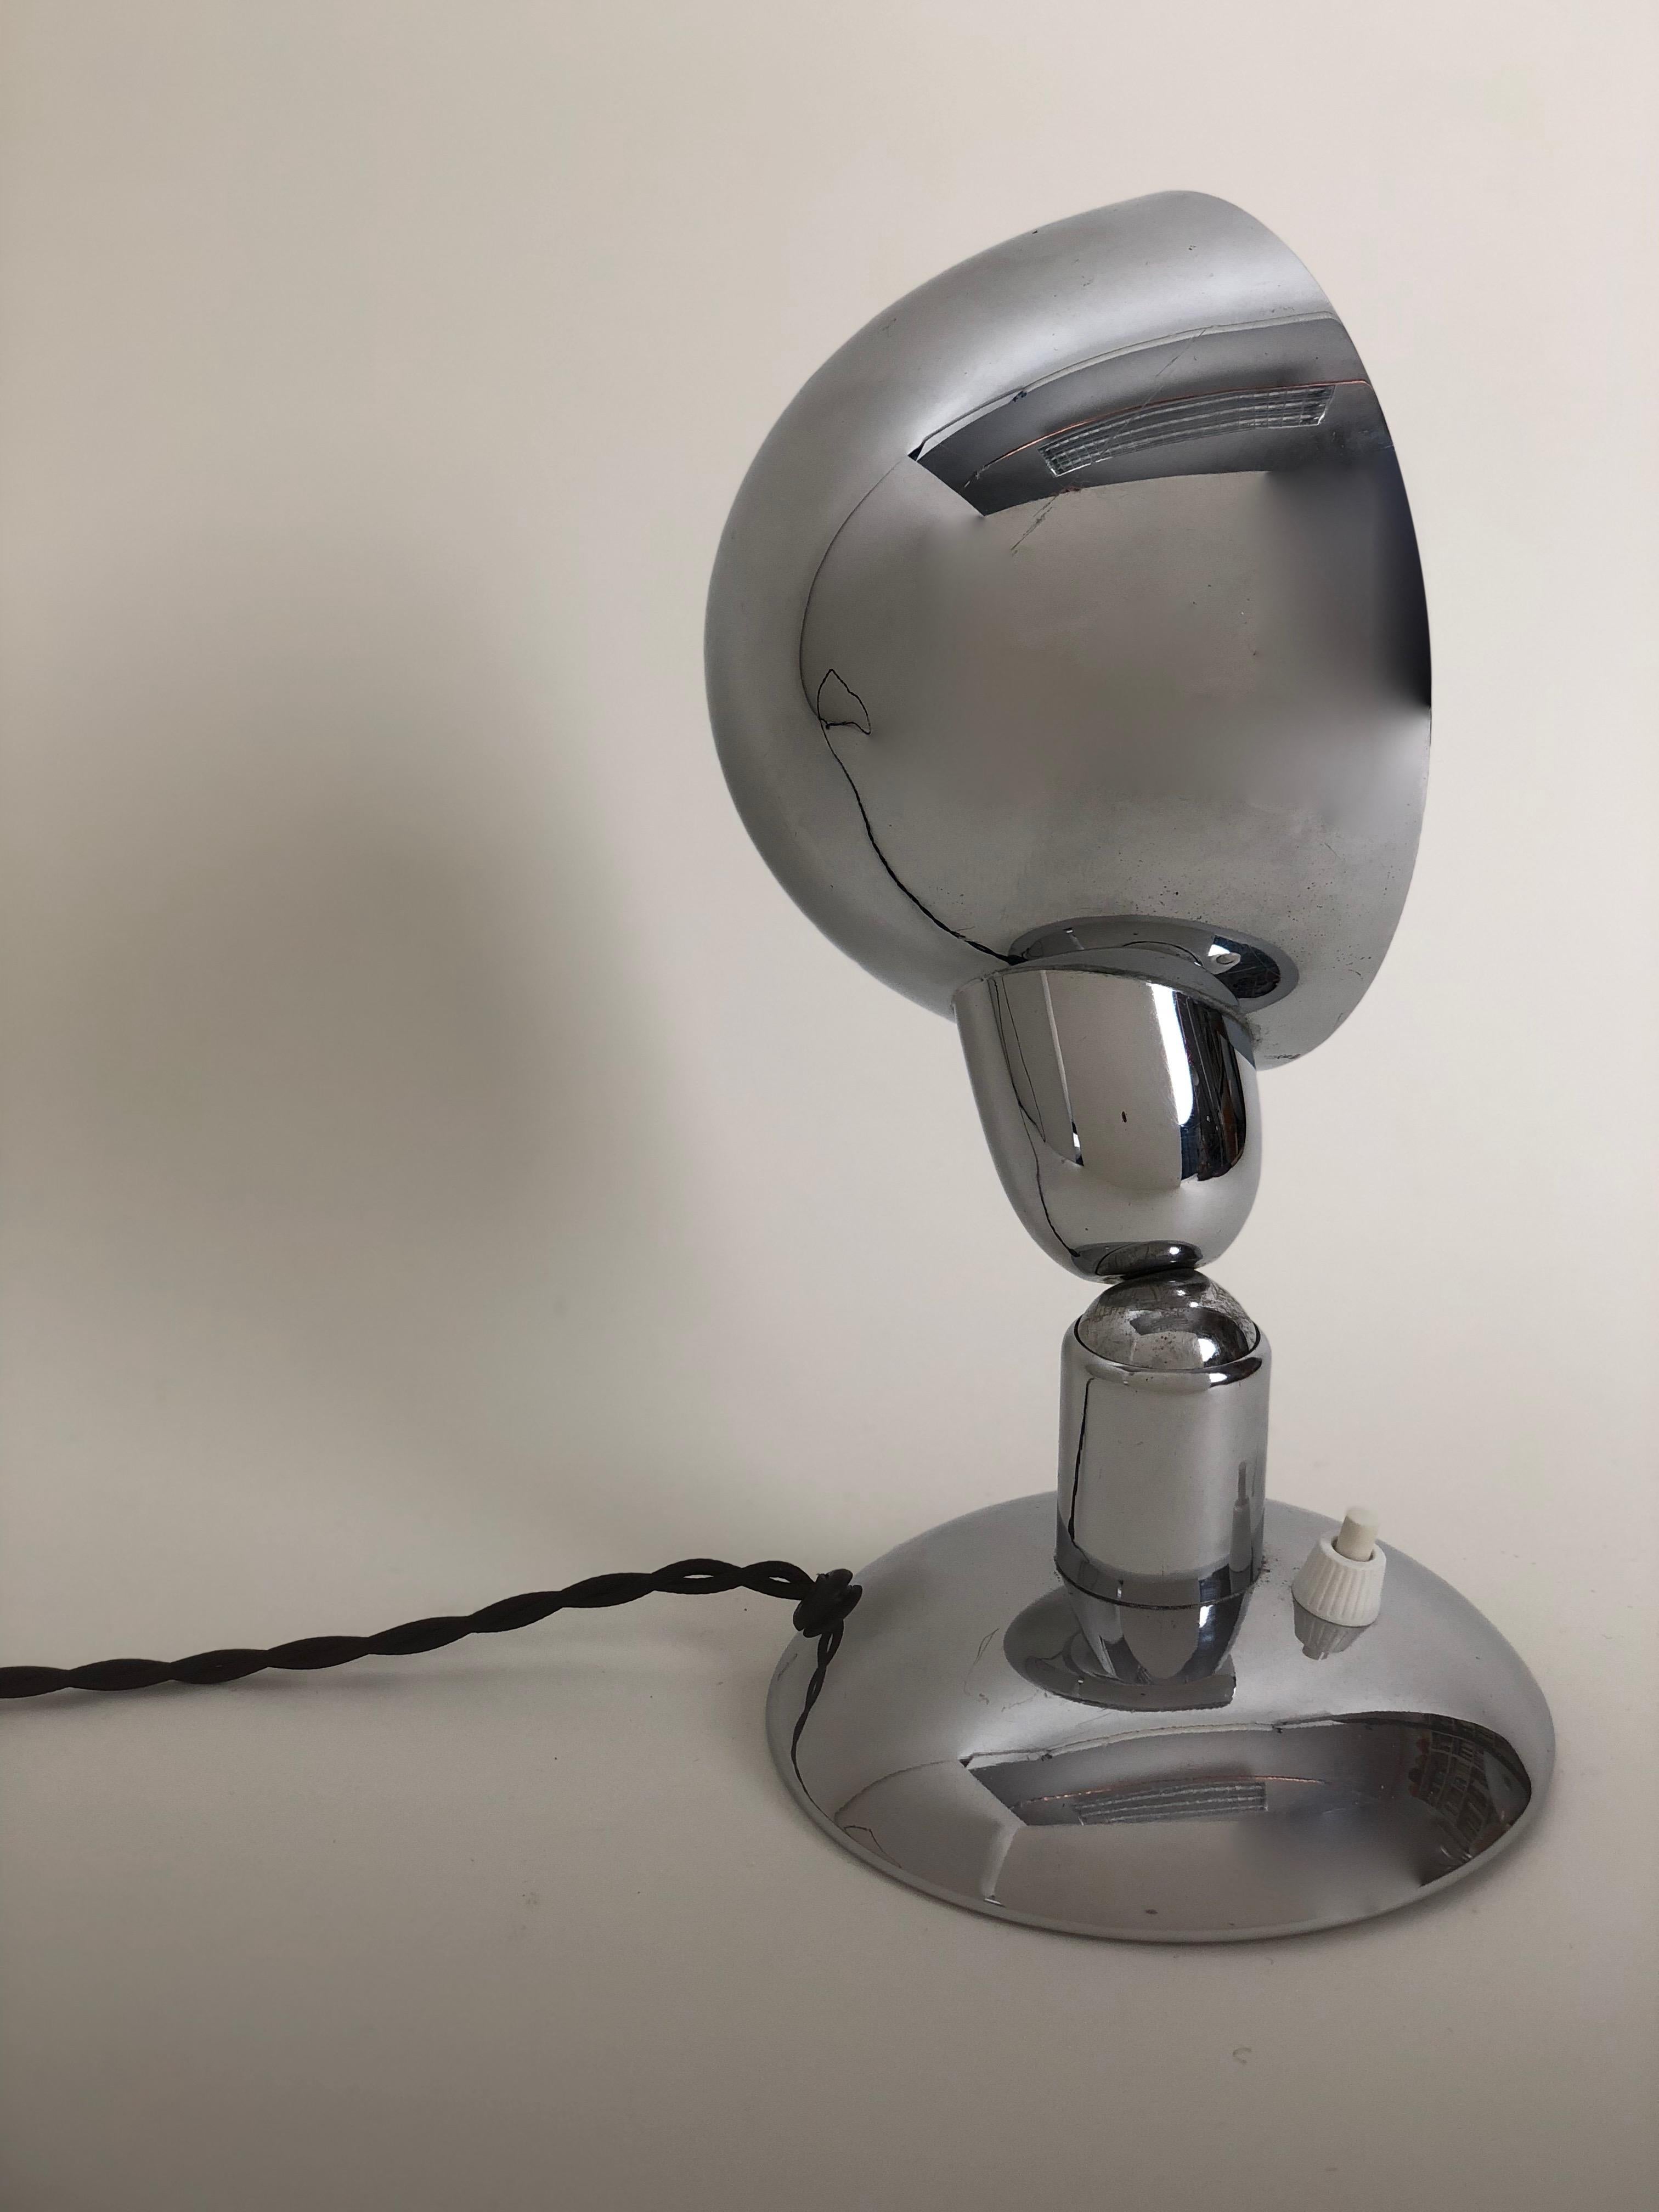 An unusual WMF Ikora lamp from the 1930 s in chrome. It has a ball and socket system to very the angle of the shade in relation to the table and wall. The shade can be rotated as well. The design is reminiscent of the Bauhaus. It has new electrical